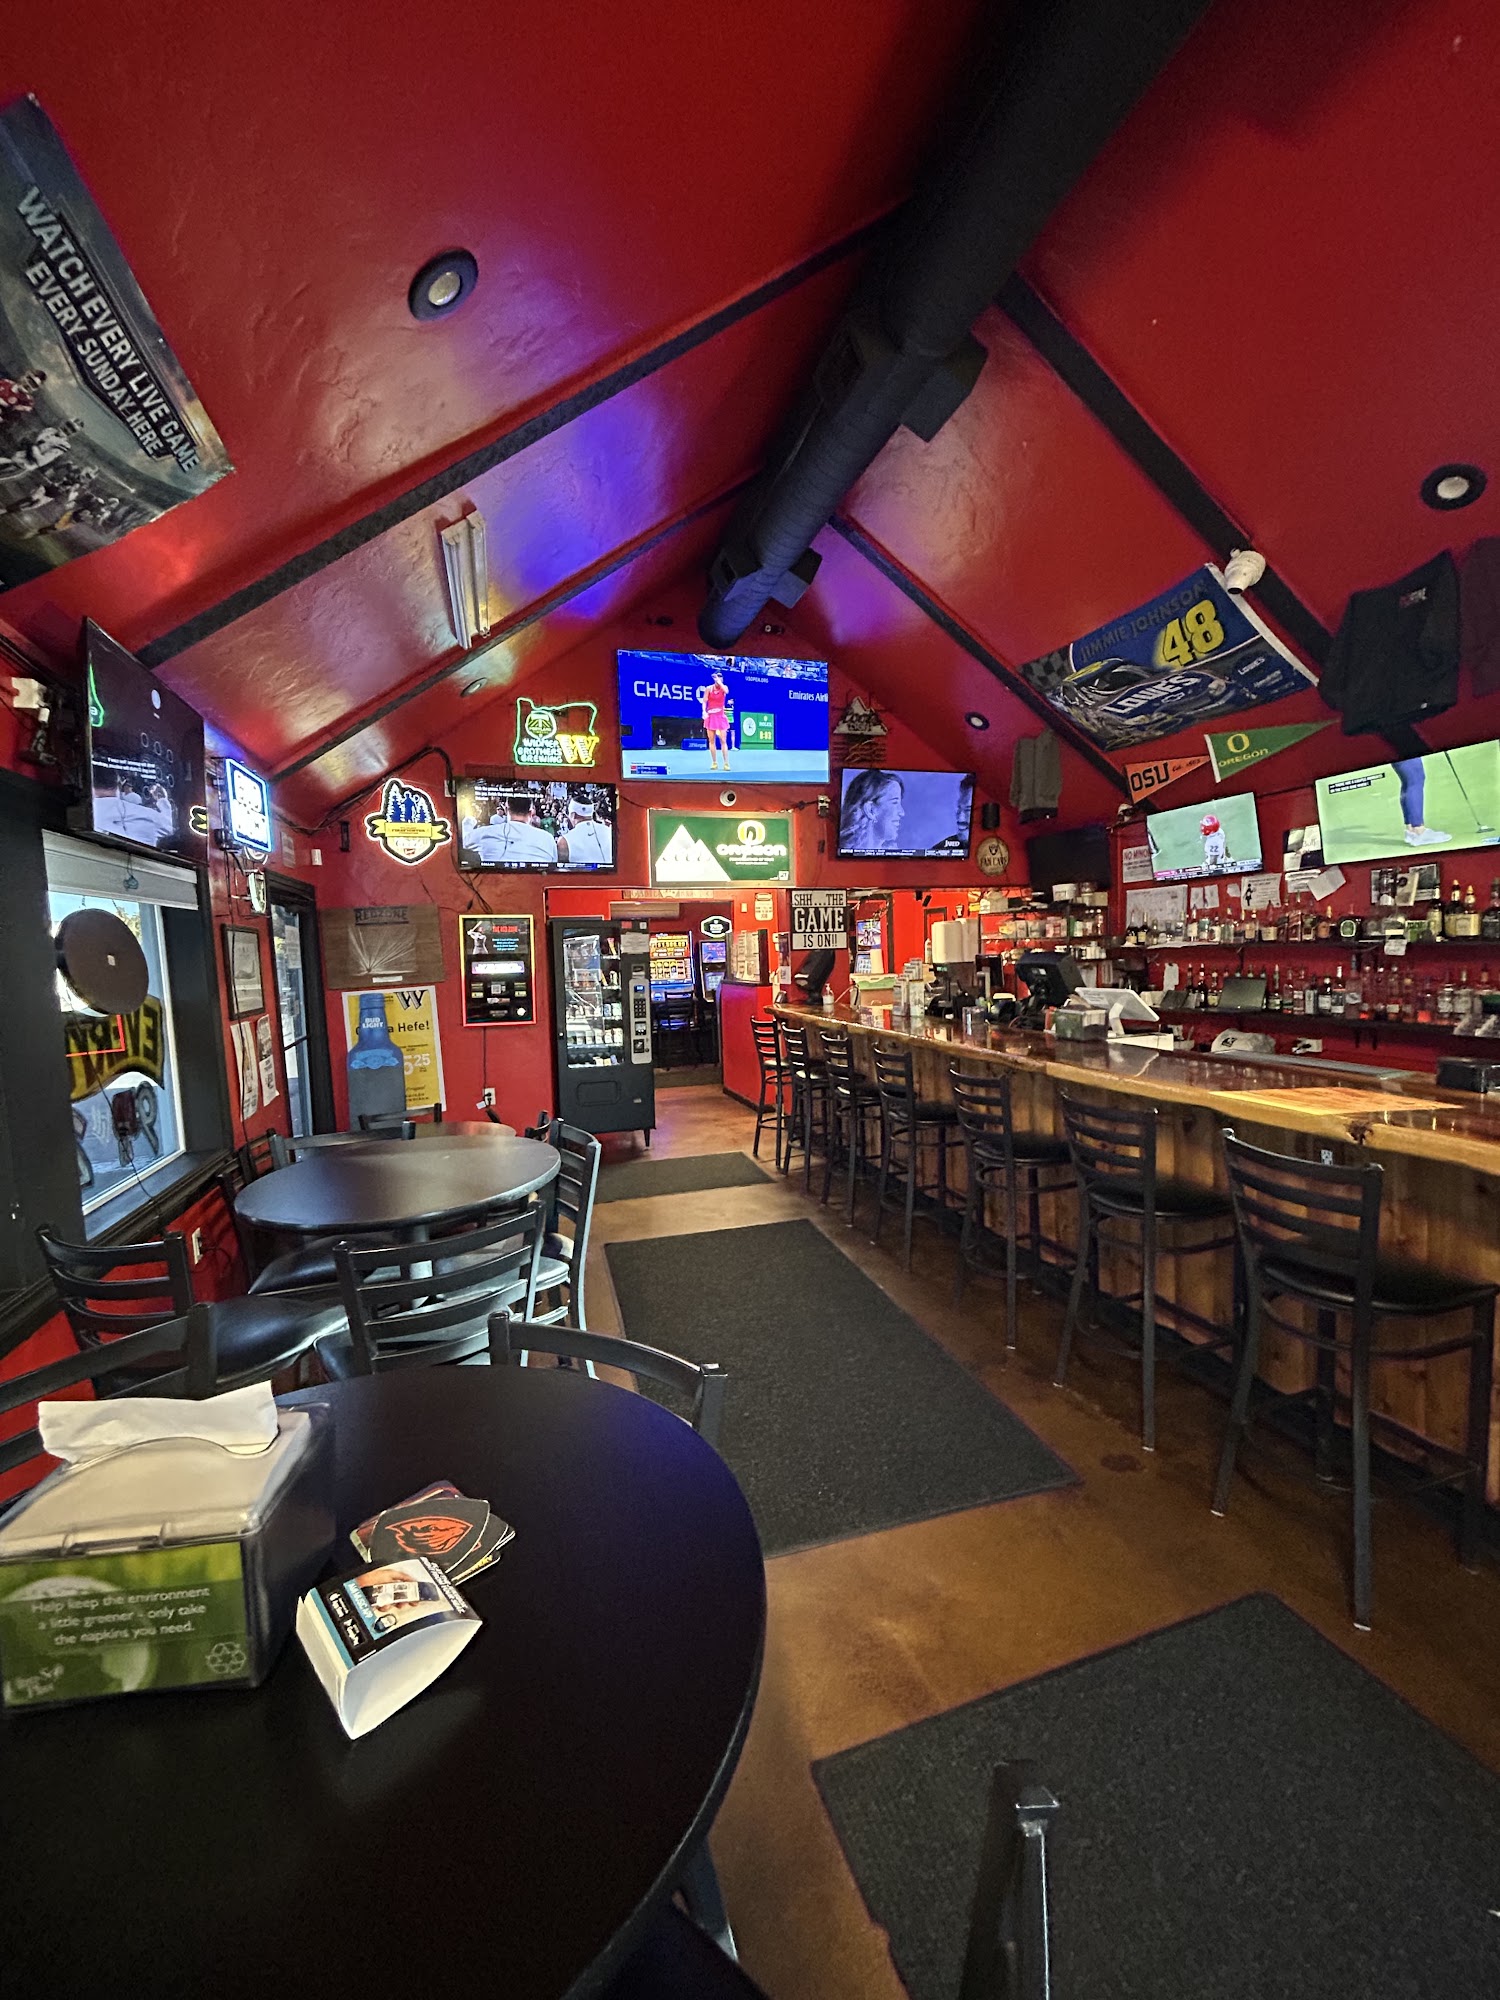 Red Zone Sports Bar